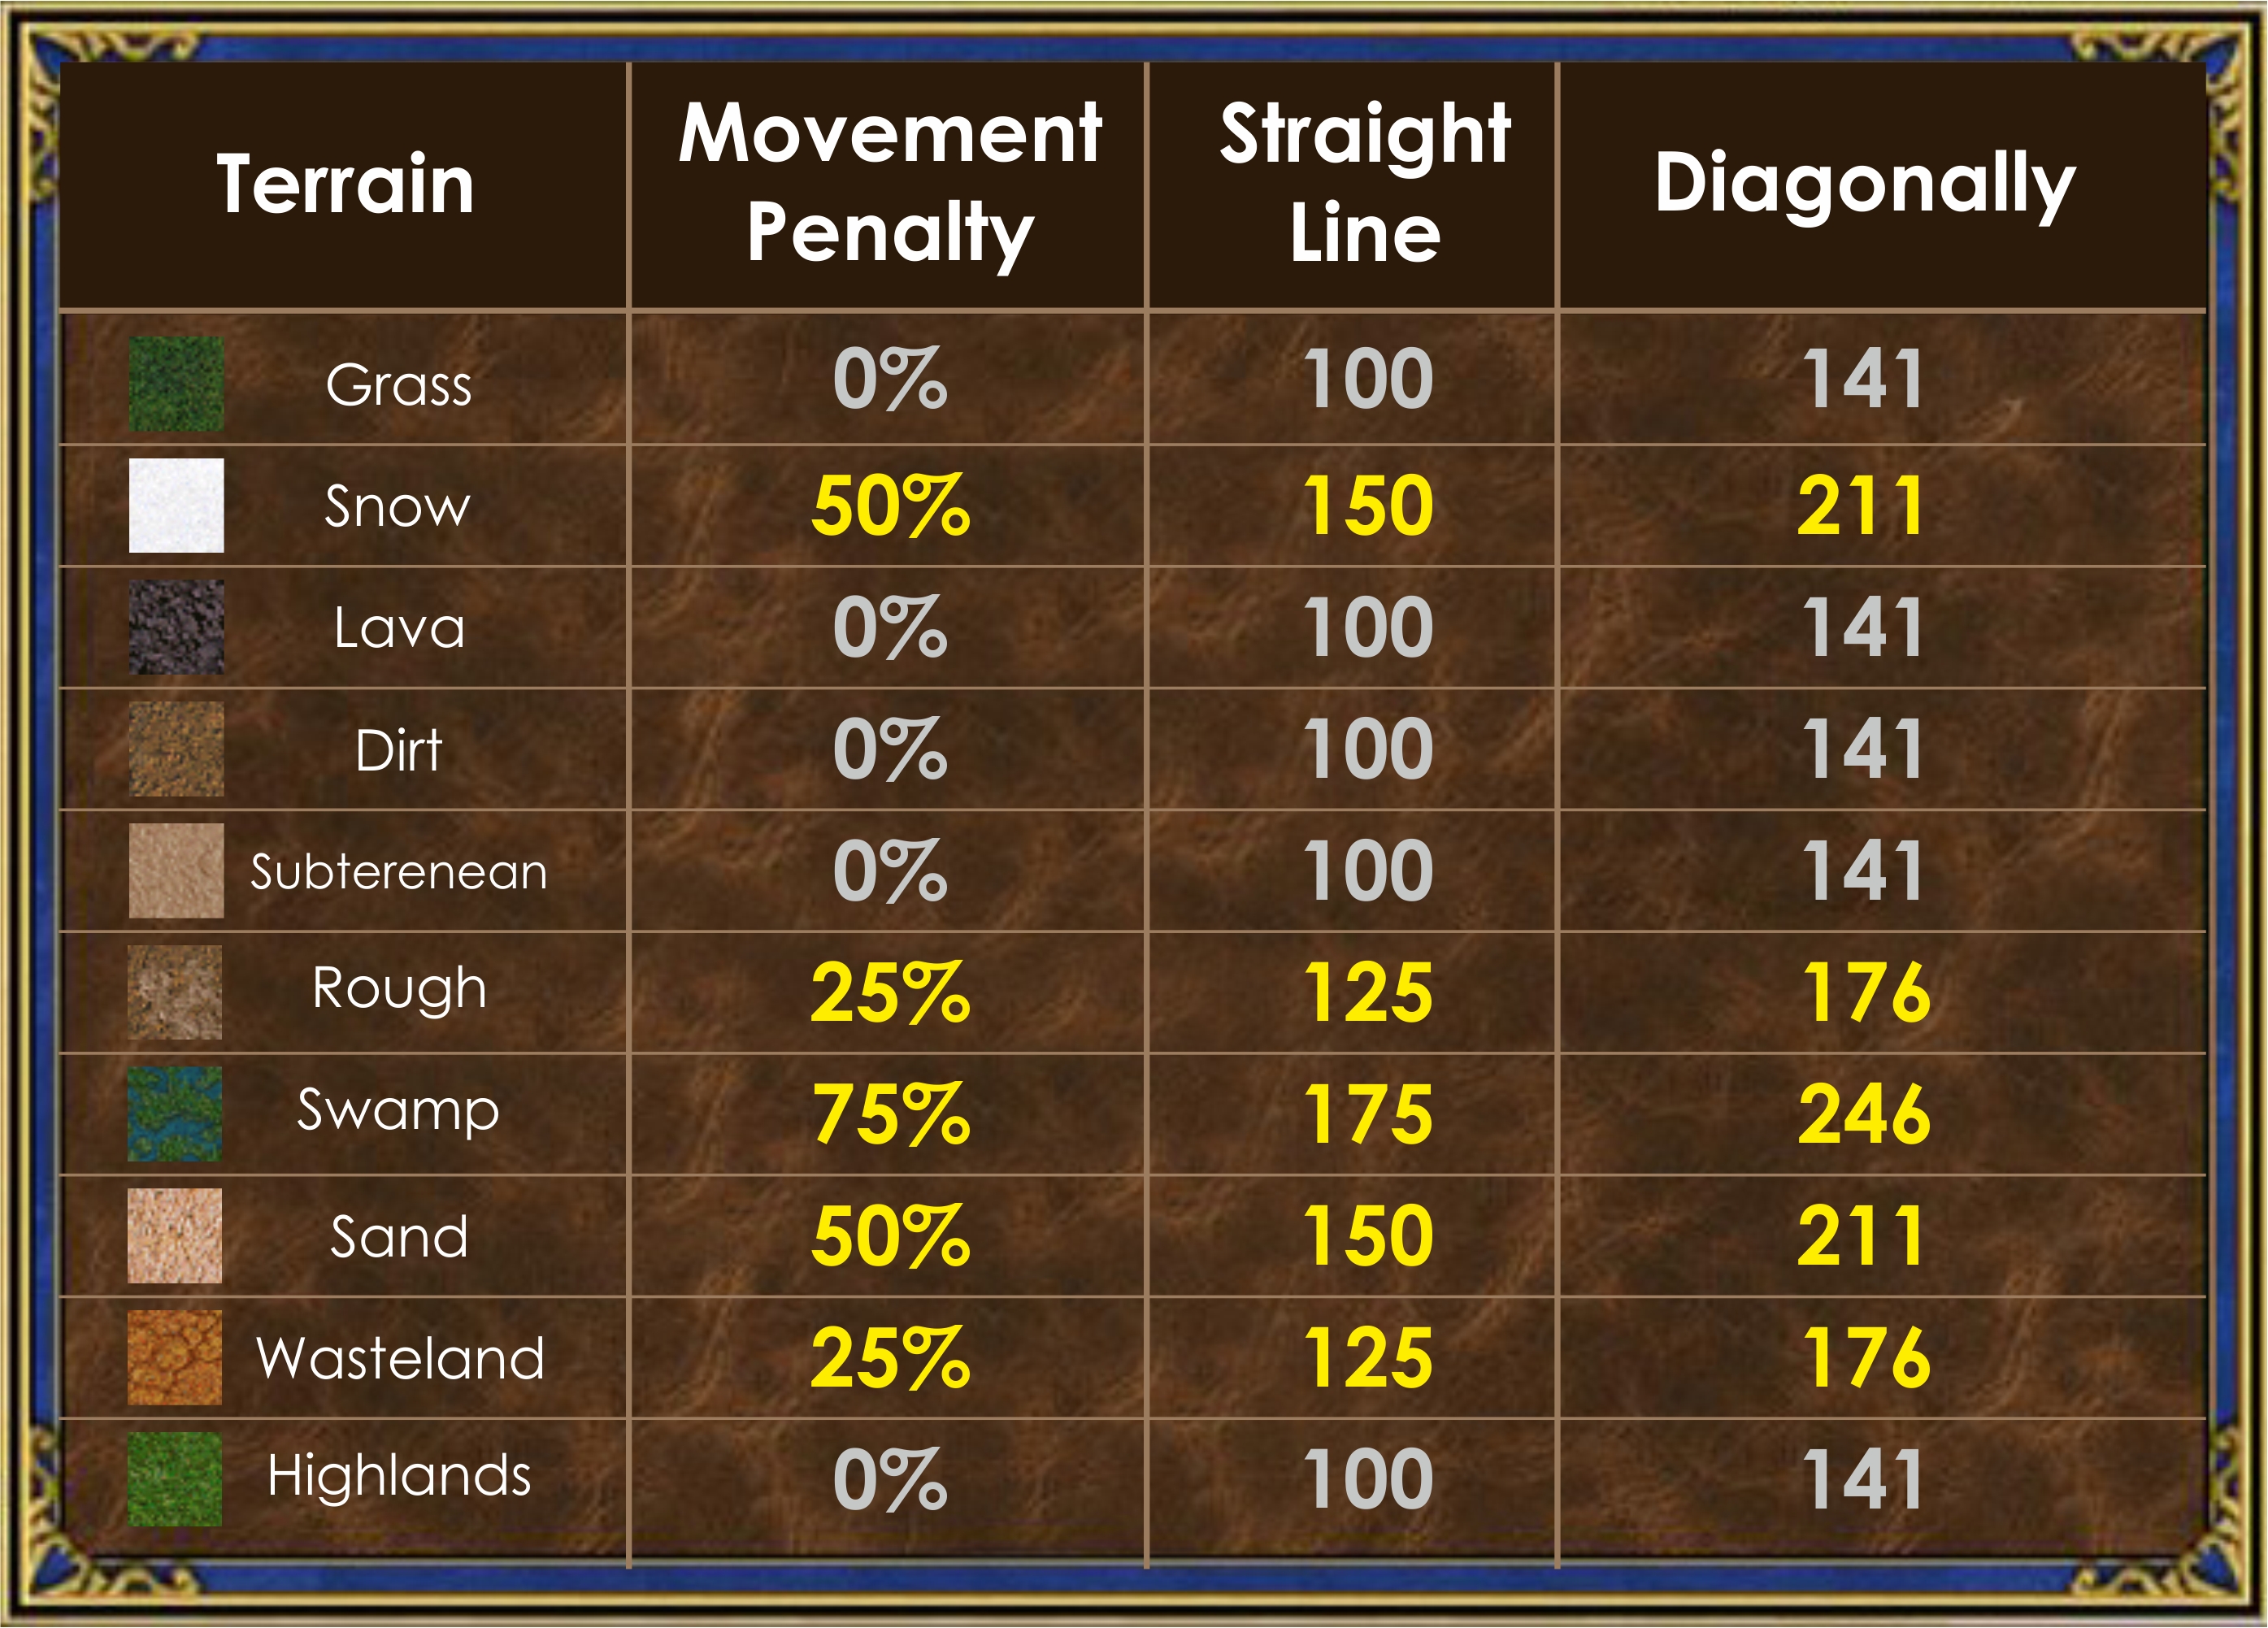 Heroes of Might and Magic 3 terrain types and their effect on movement